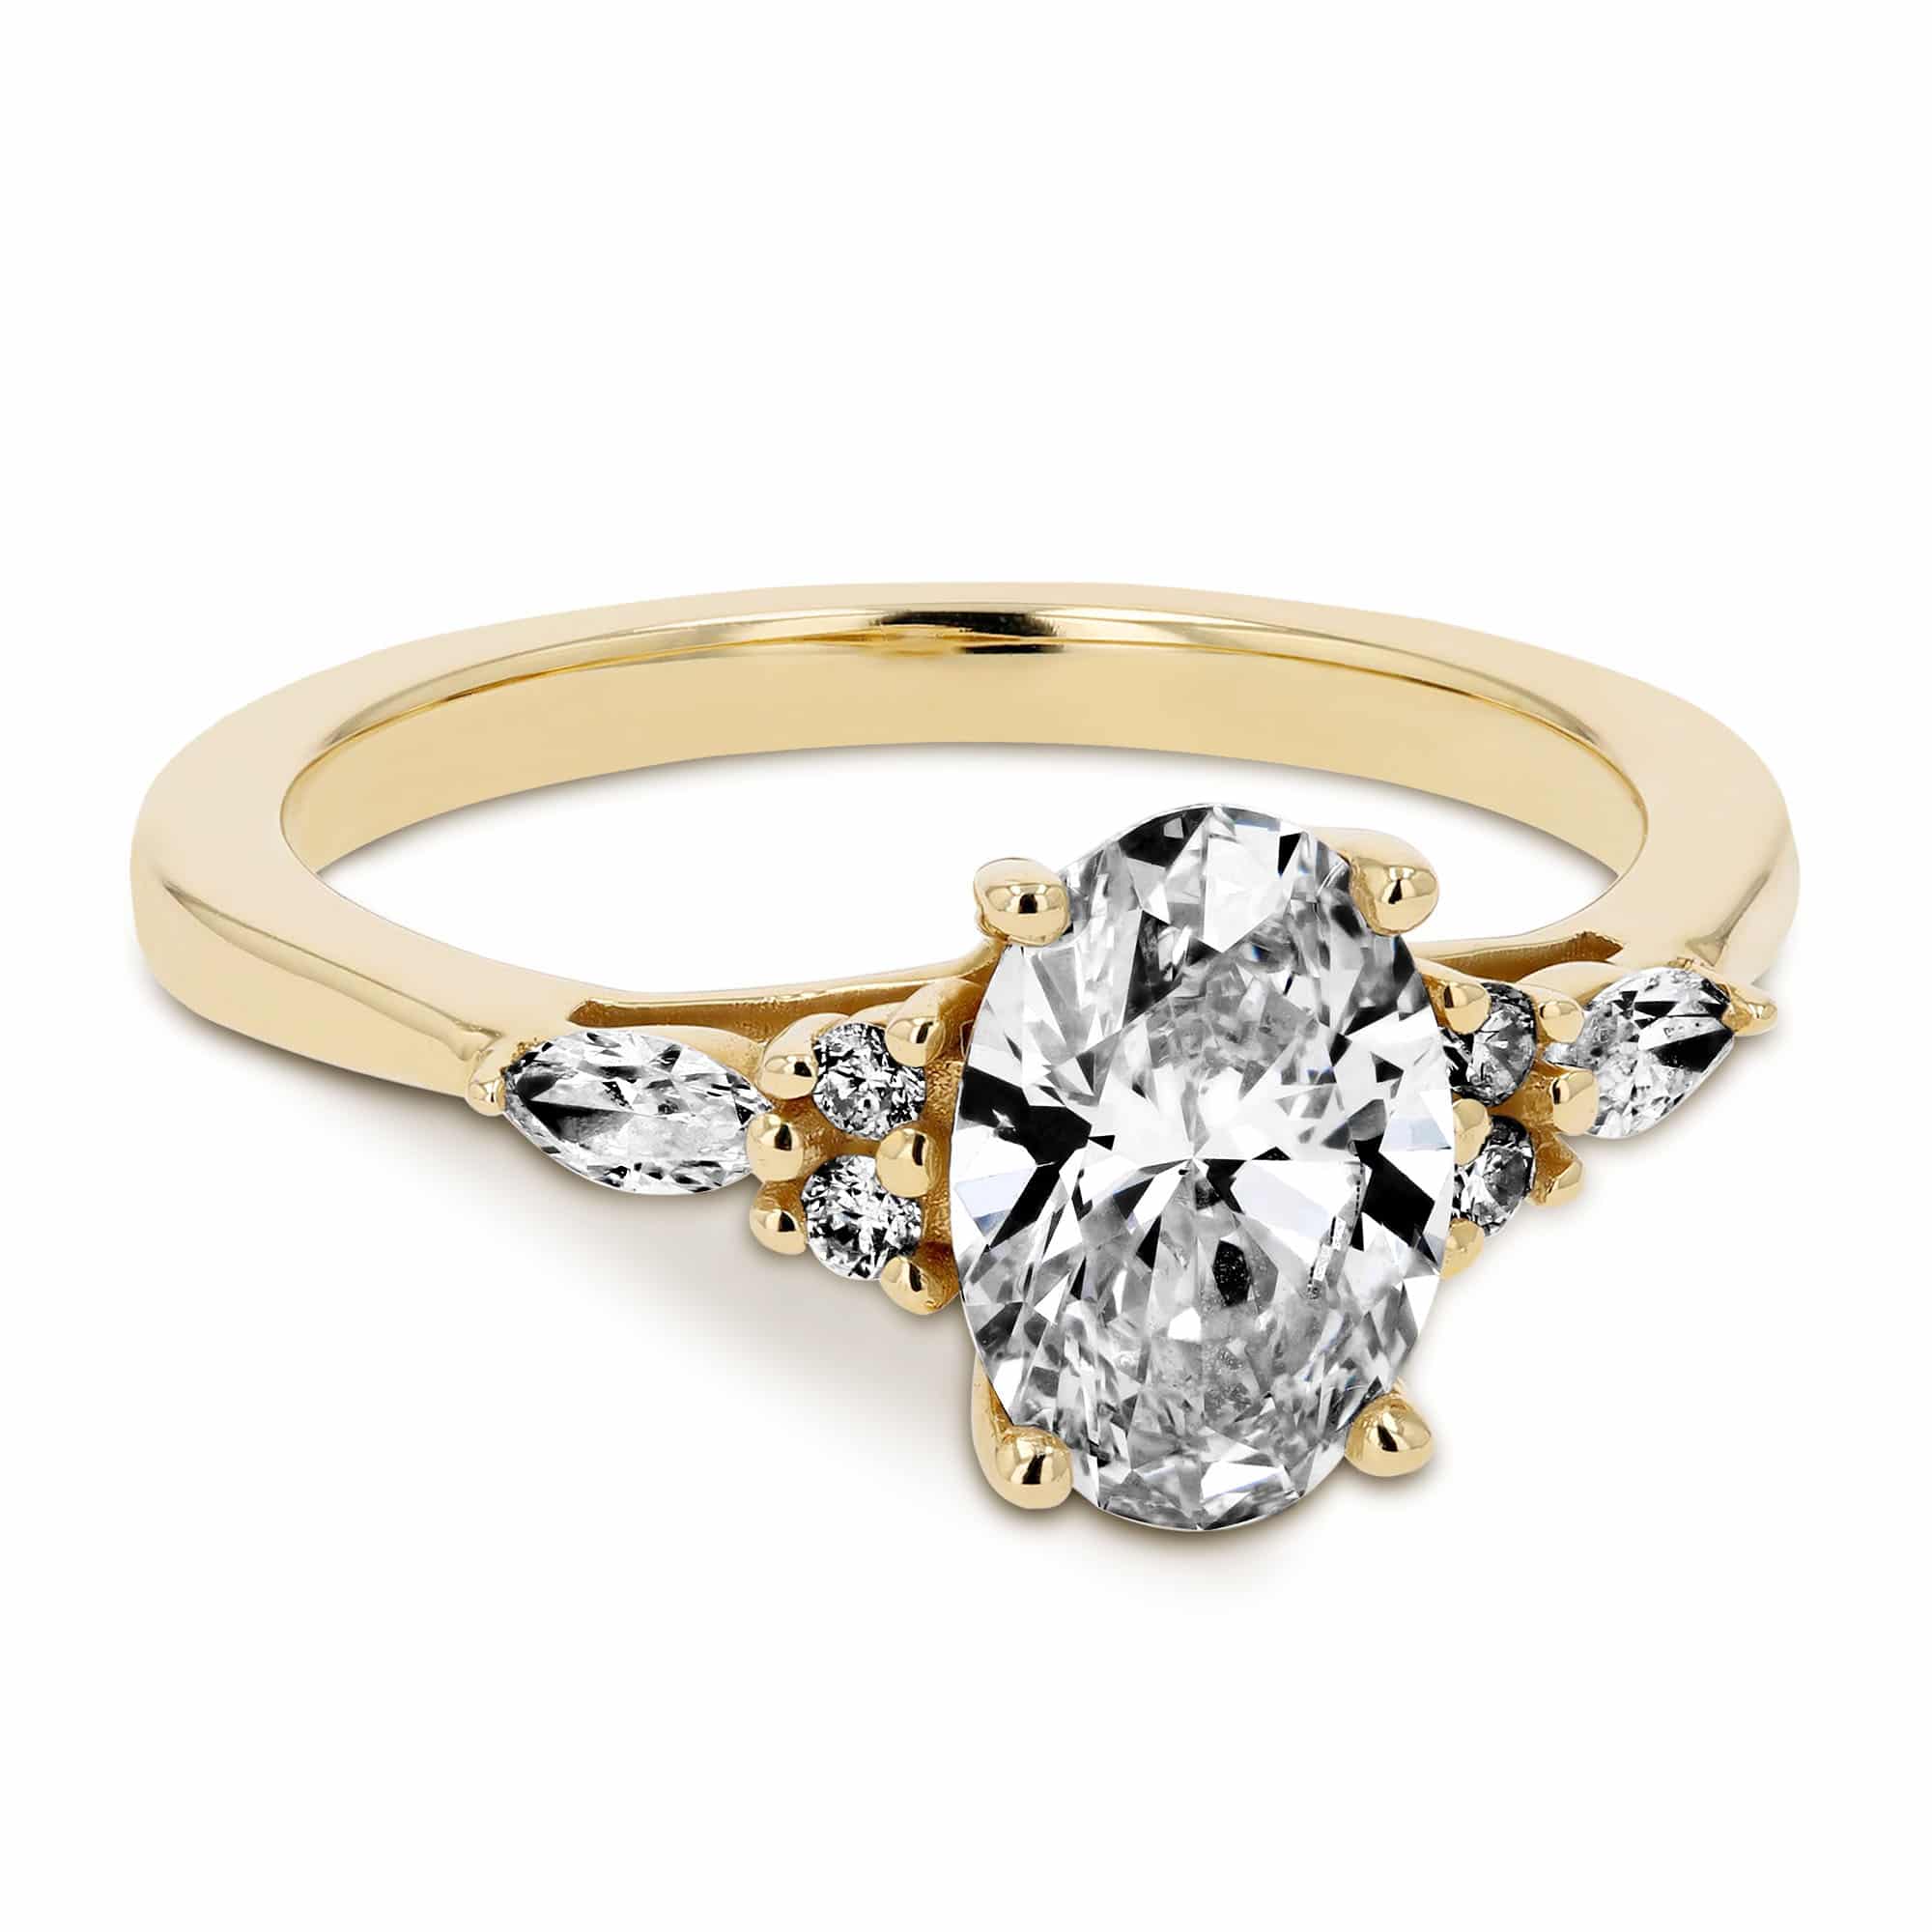 Shown with 1ct Oval Cut Lab Grown Diamond in 14K Yellow Gold|Diamond accented engagement ring with a 1ct oval cut lab grown diamond set in 14k yellow gold